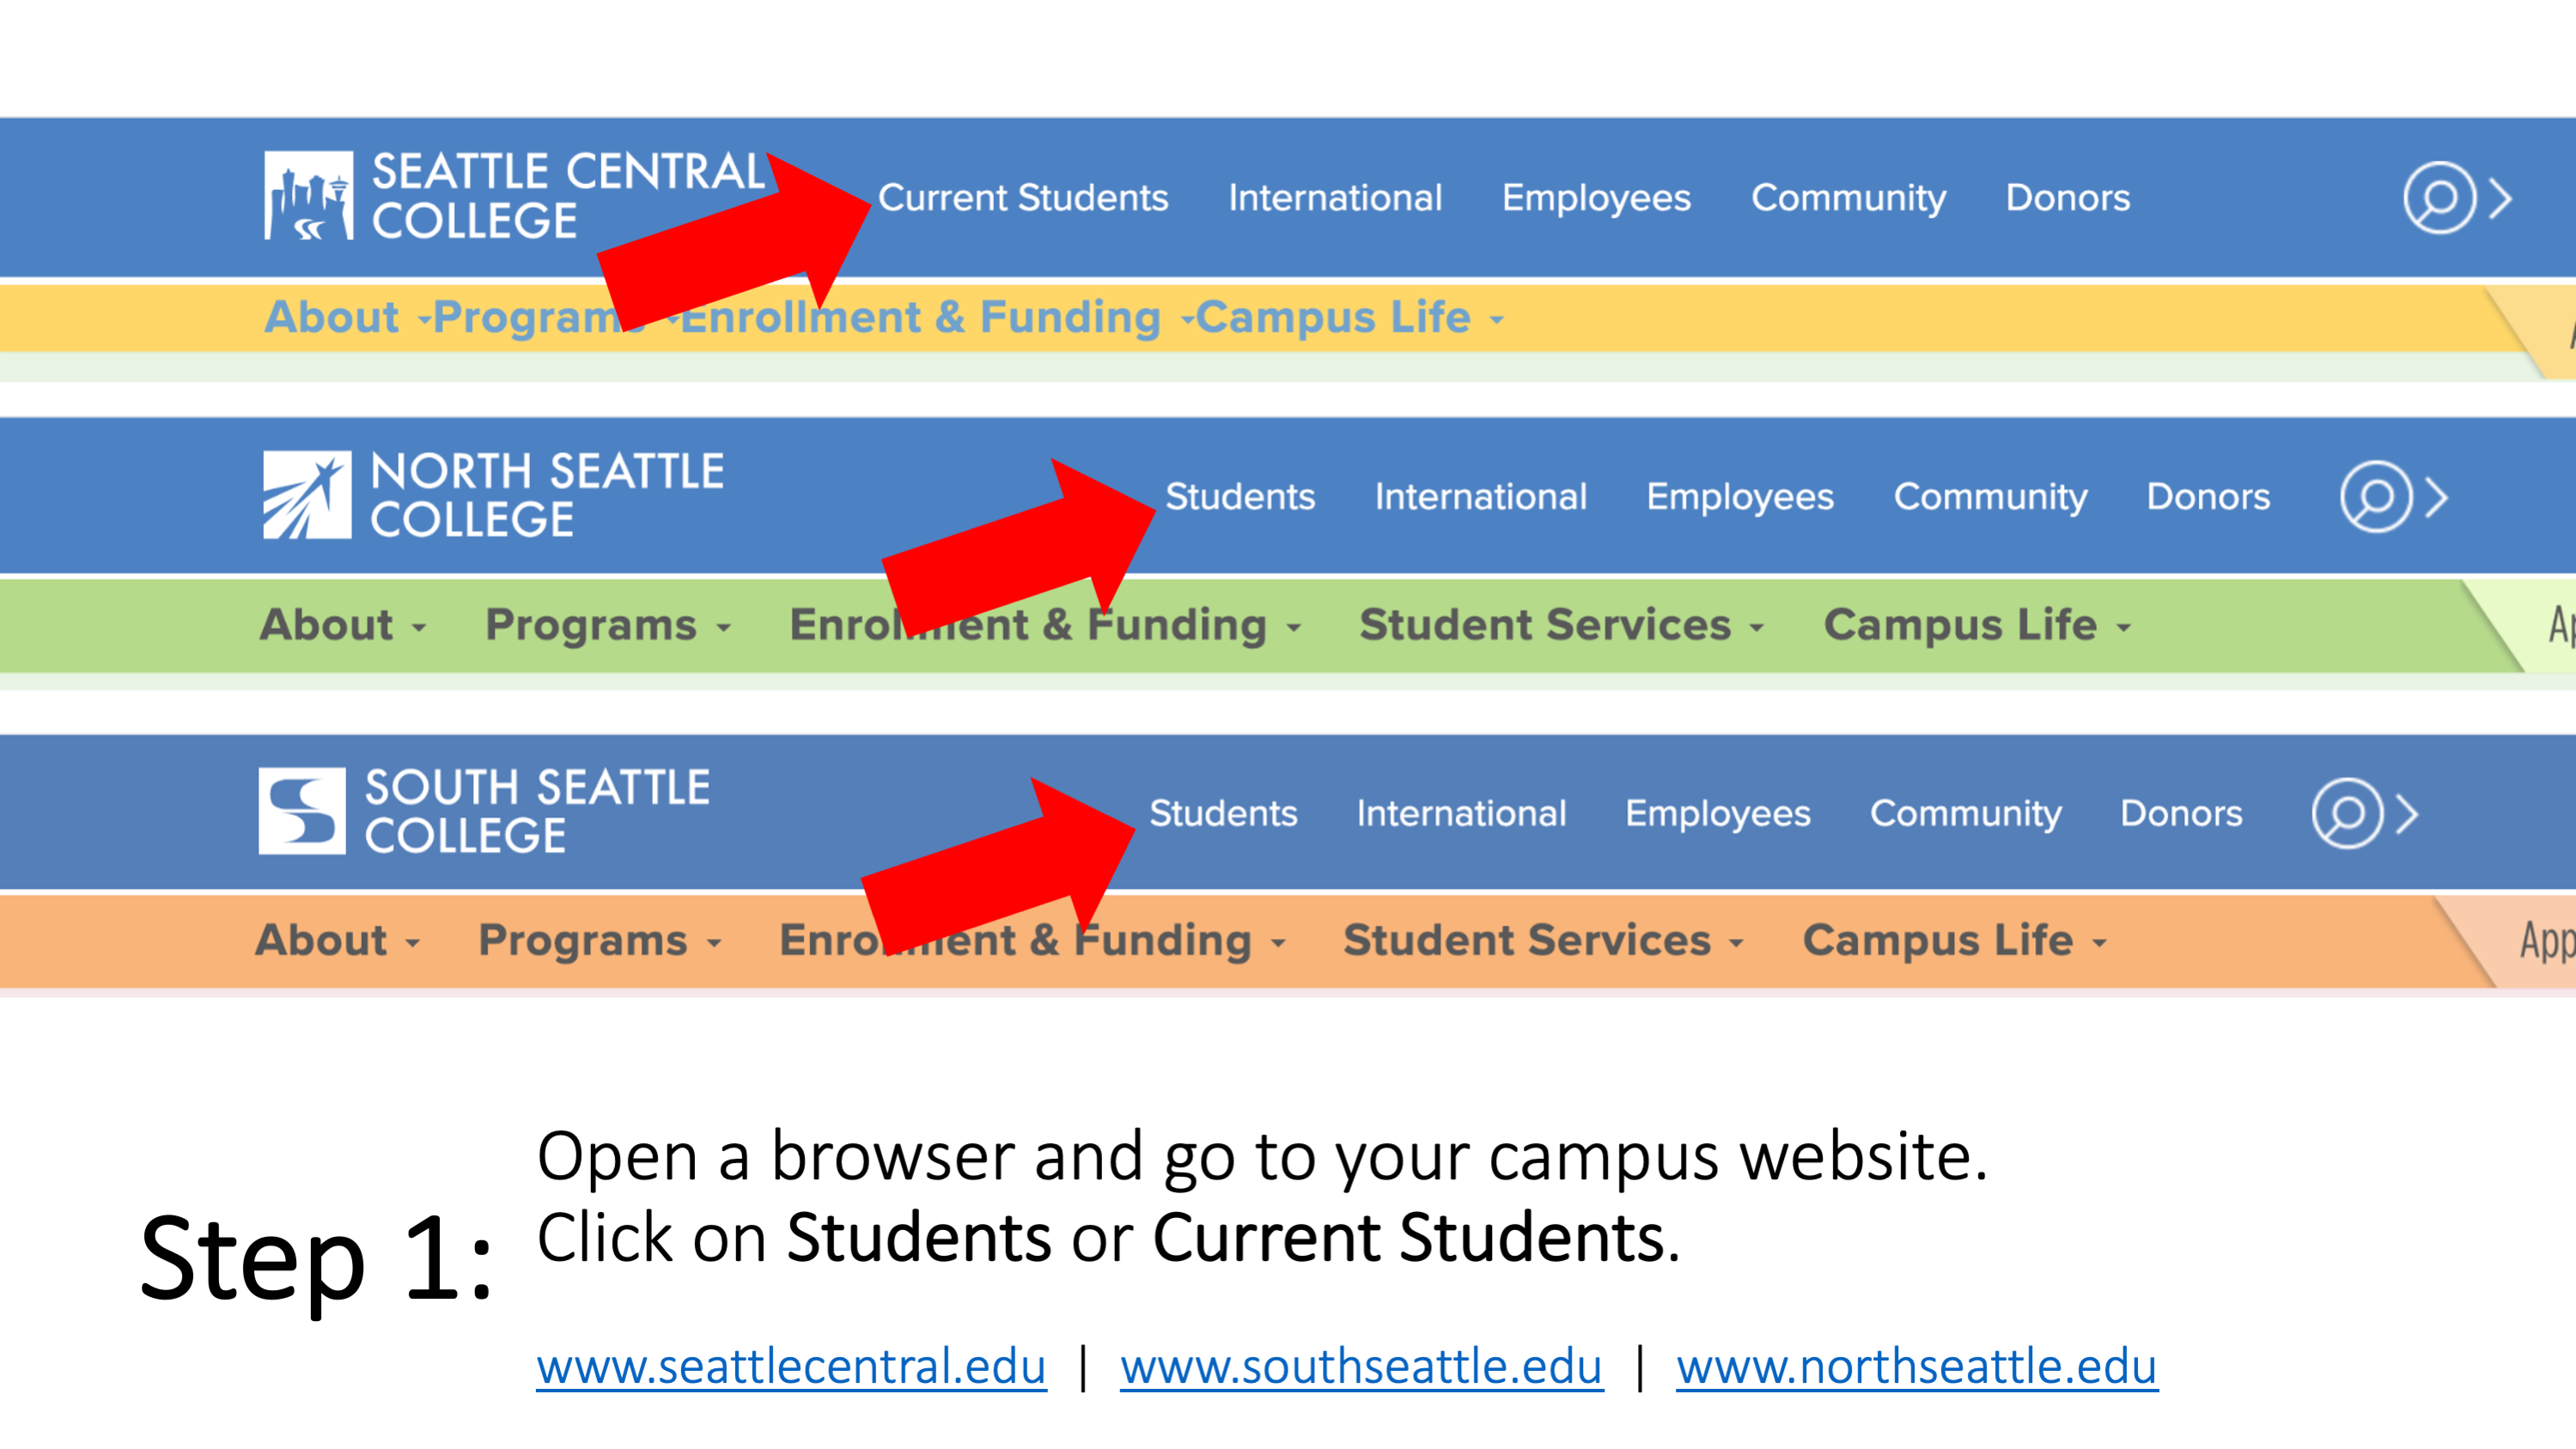 Step 1: Open a browser and go to your campus website. Click on Students or Current Students. www.seattlecentral.edu , www.southseattle.edu , or www.northseattle.edu.